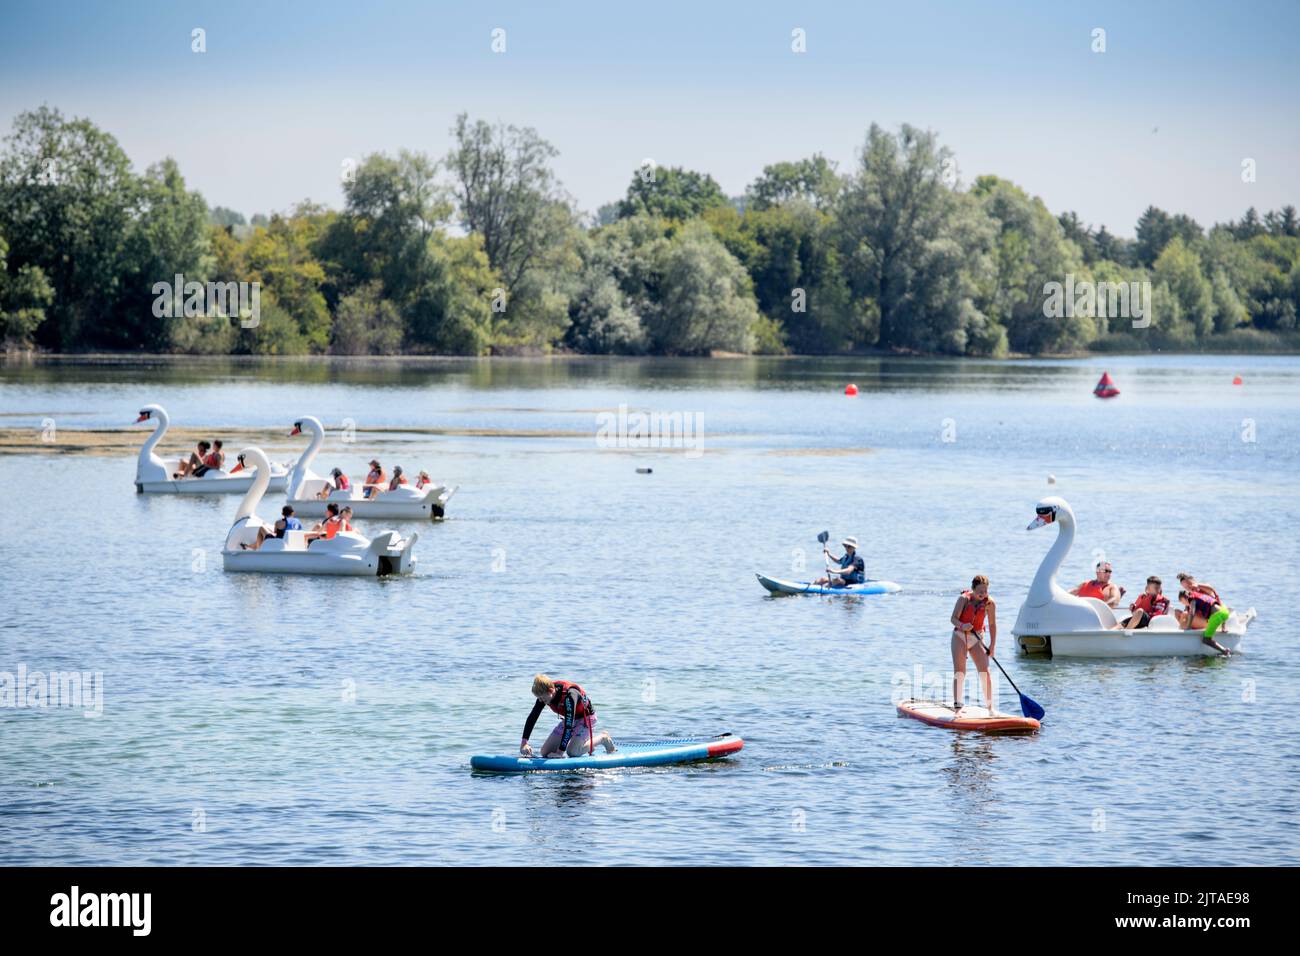 The Cotswold Water Park near Cirencester, Gloucestershire. Stock Photo